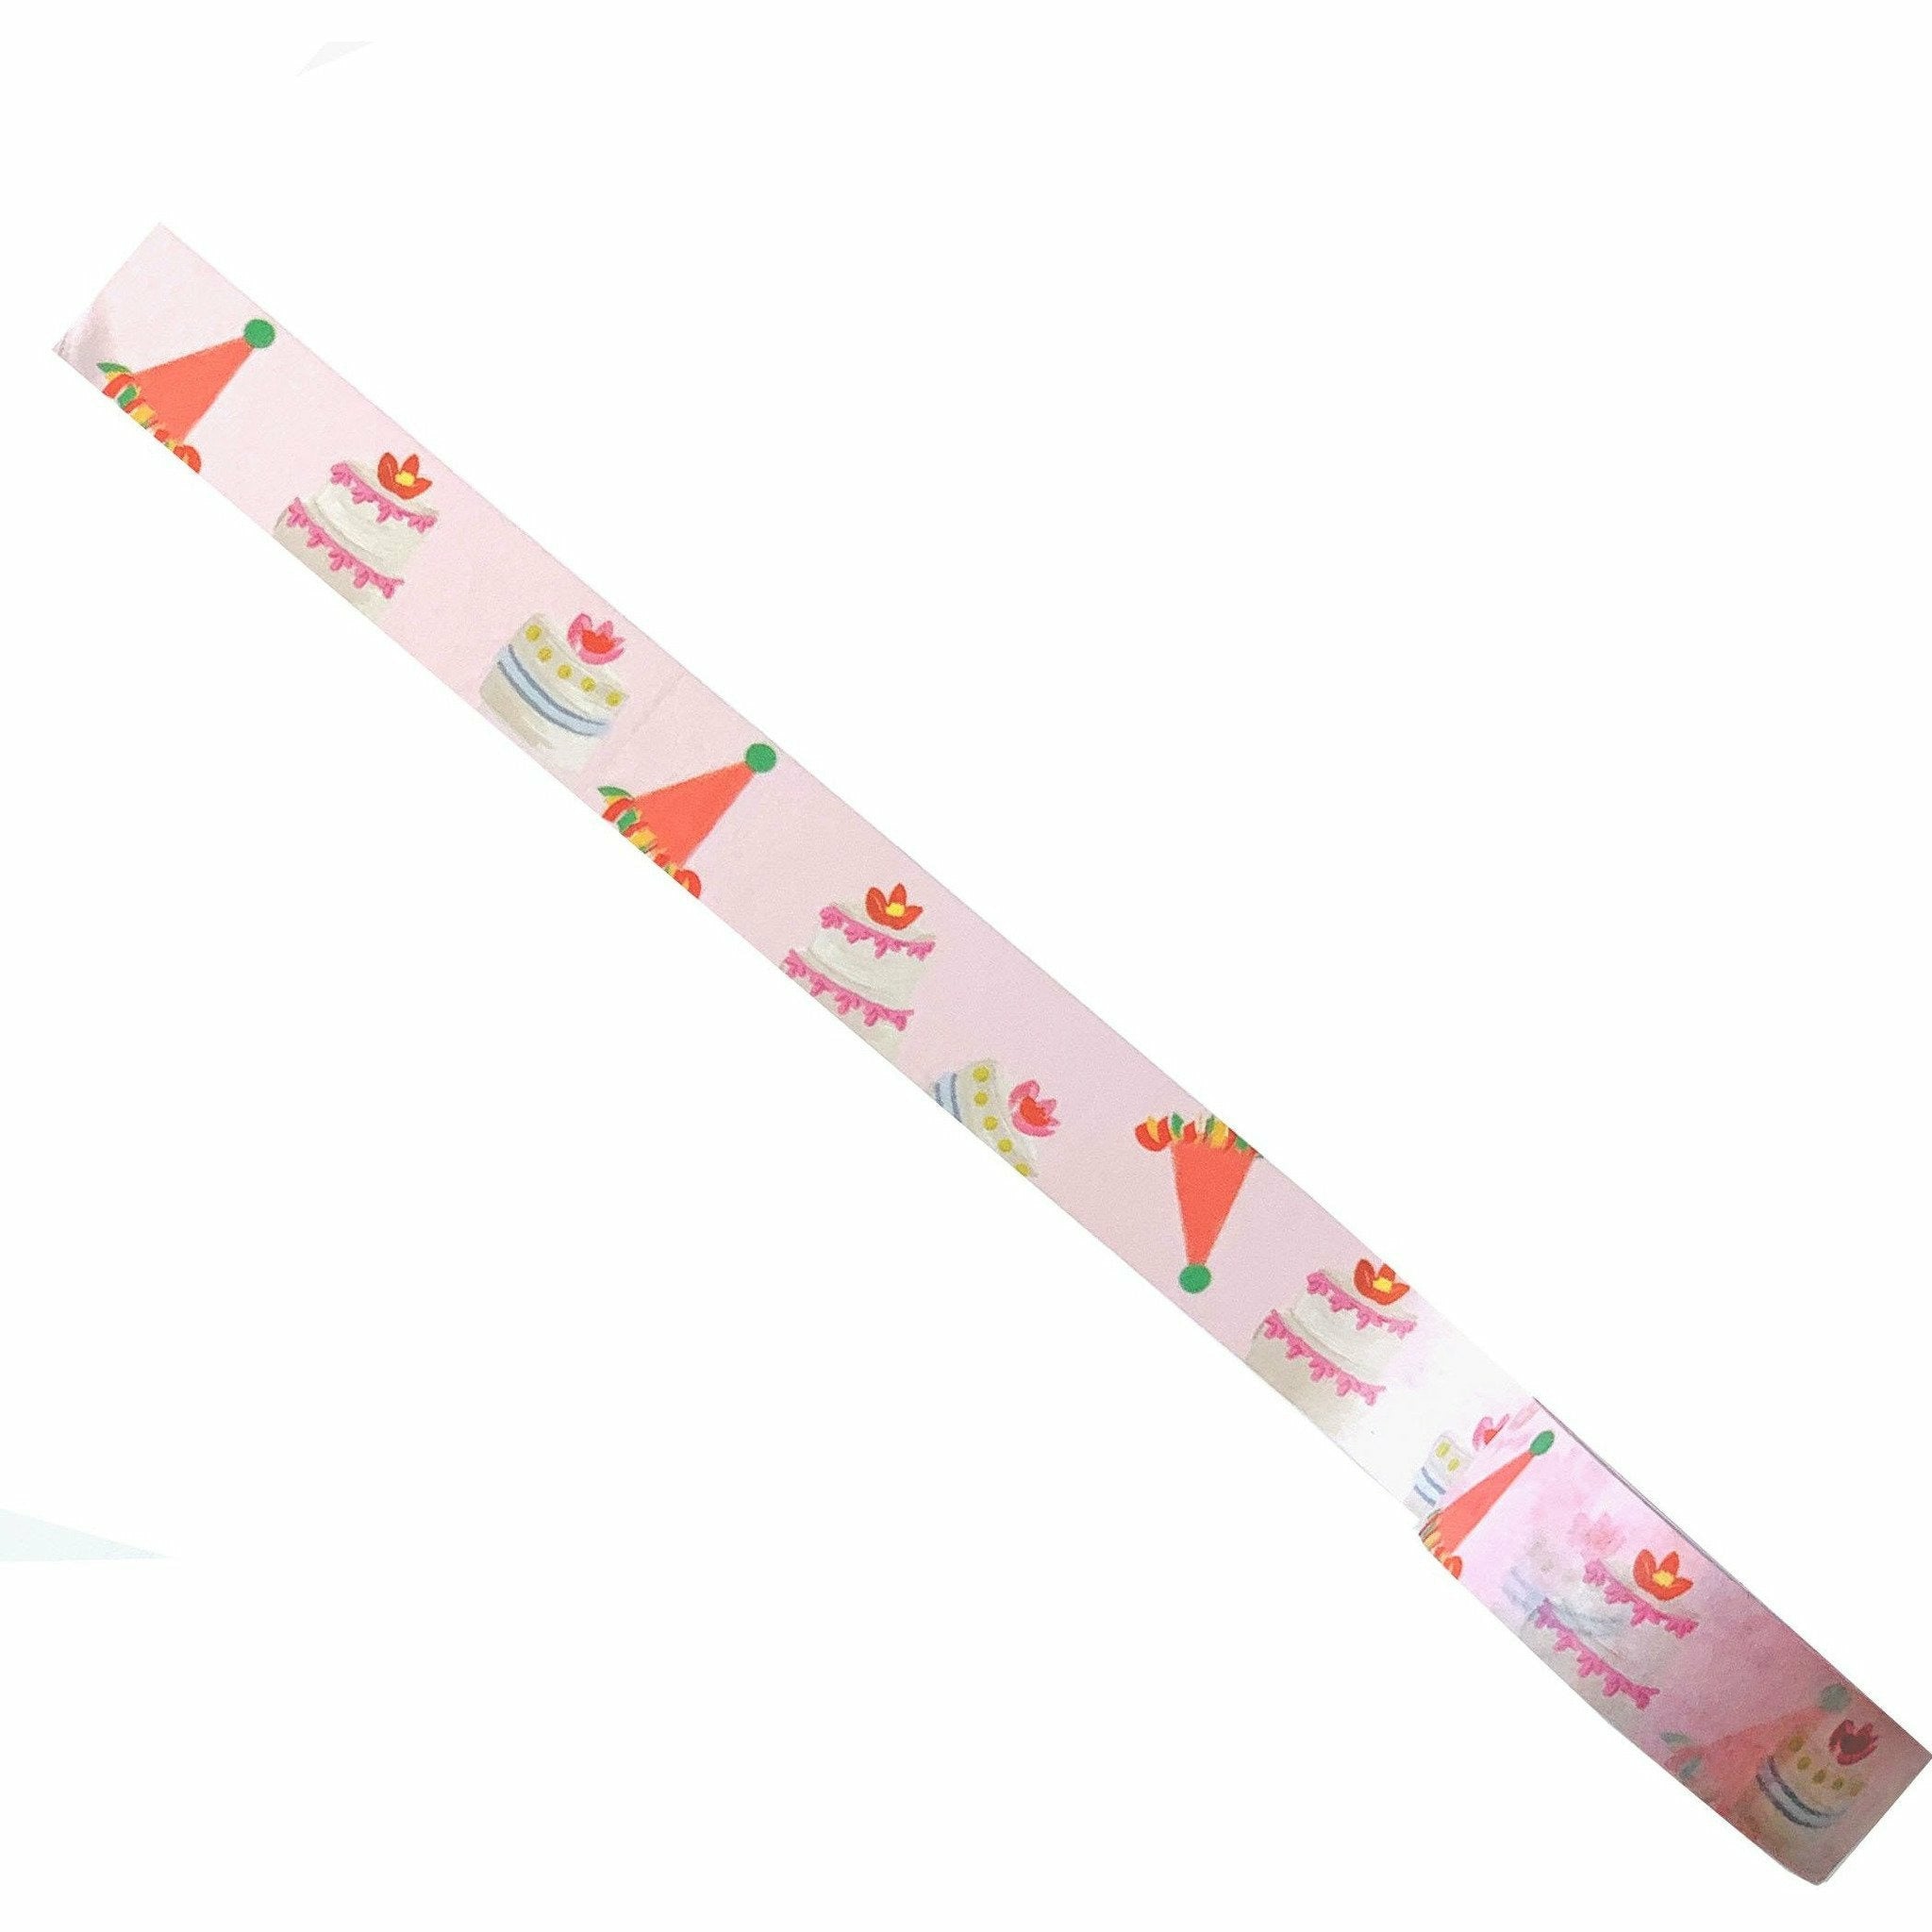 Birthday Hats Printed Graphic Washi Tape for Decorating Things - The First Snow